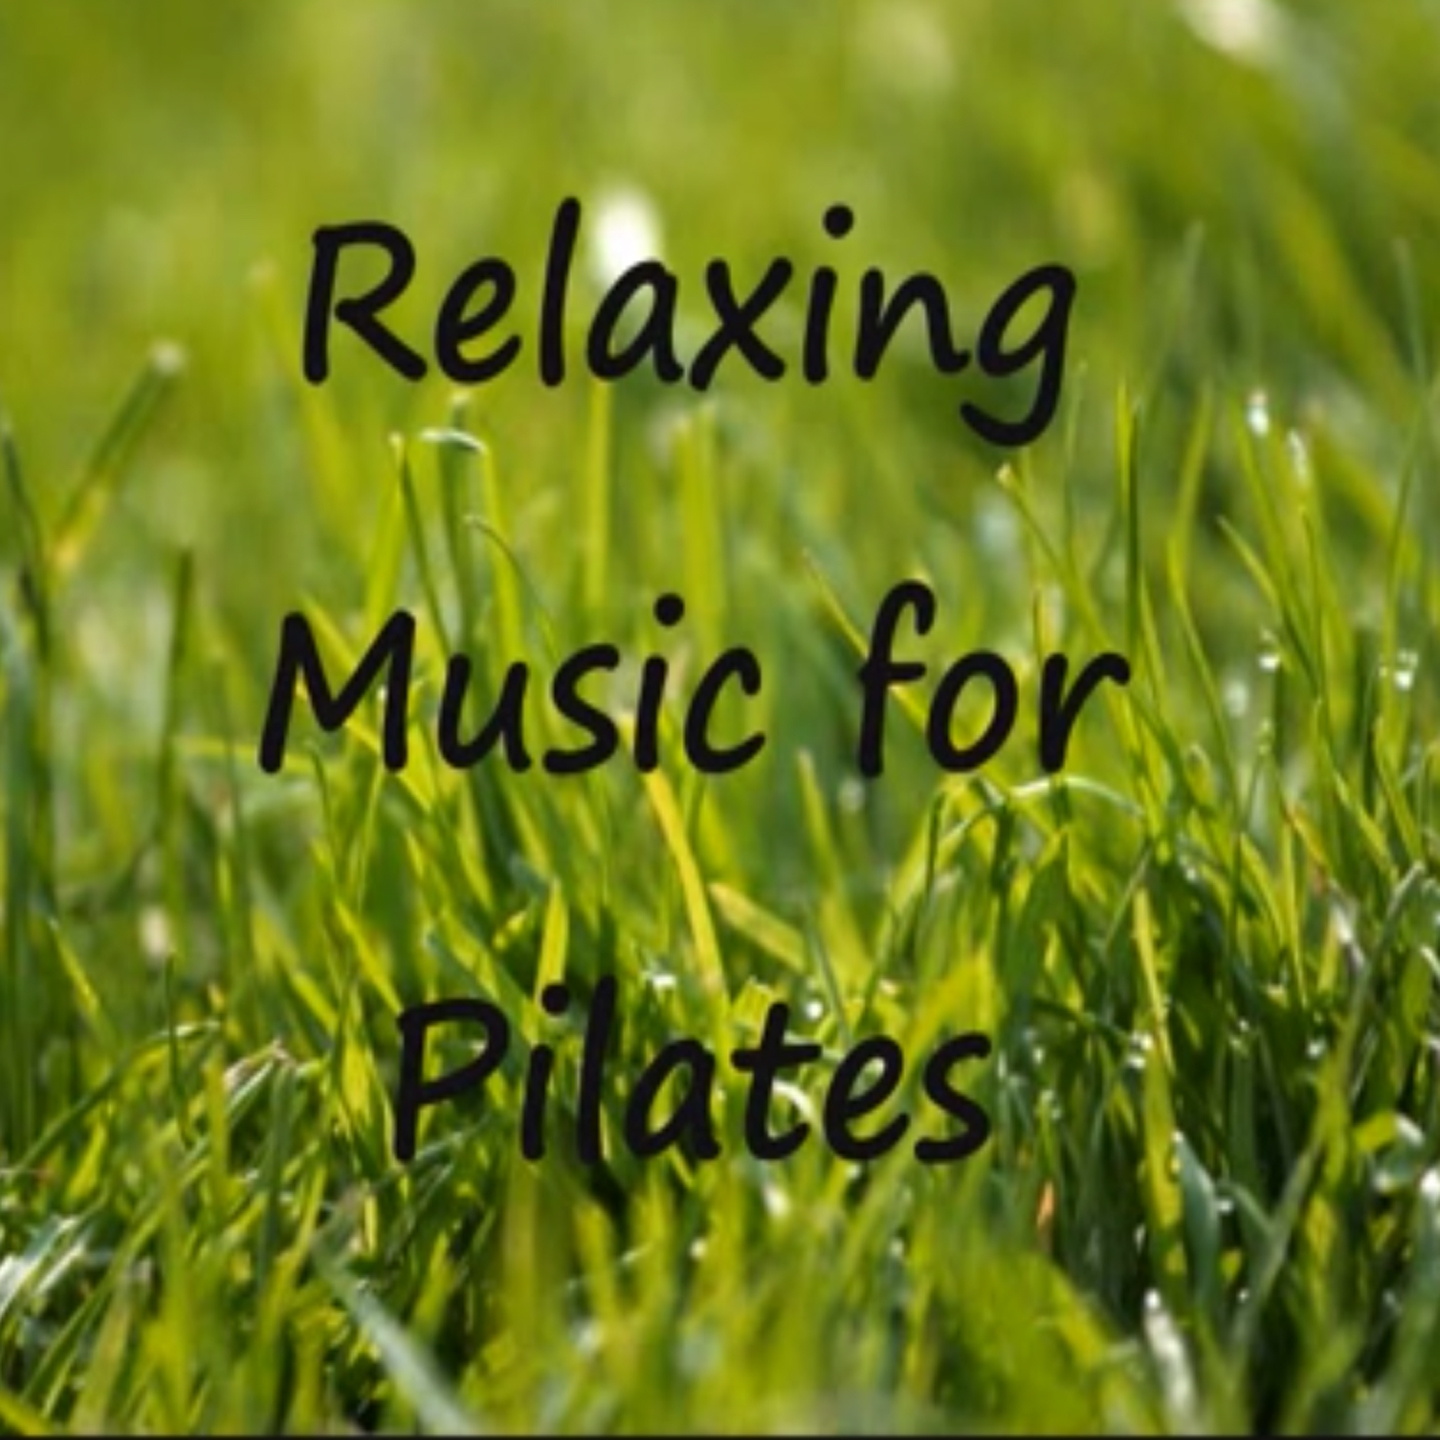 Relaxing Music for Pilates